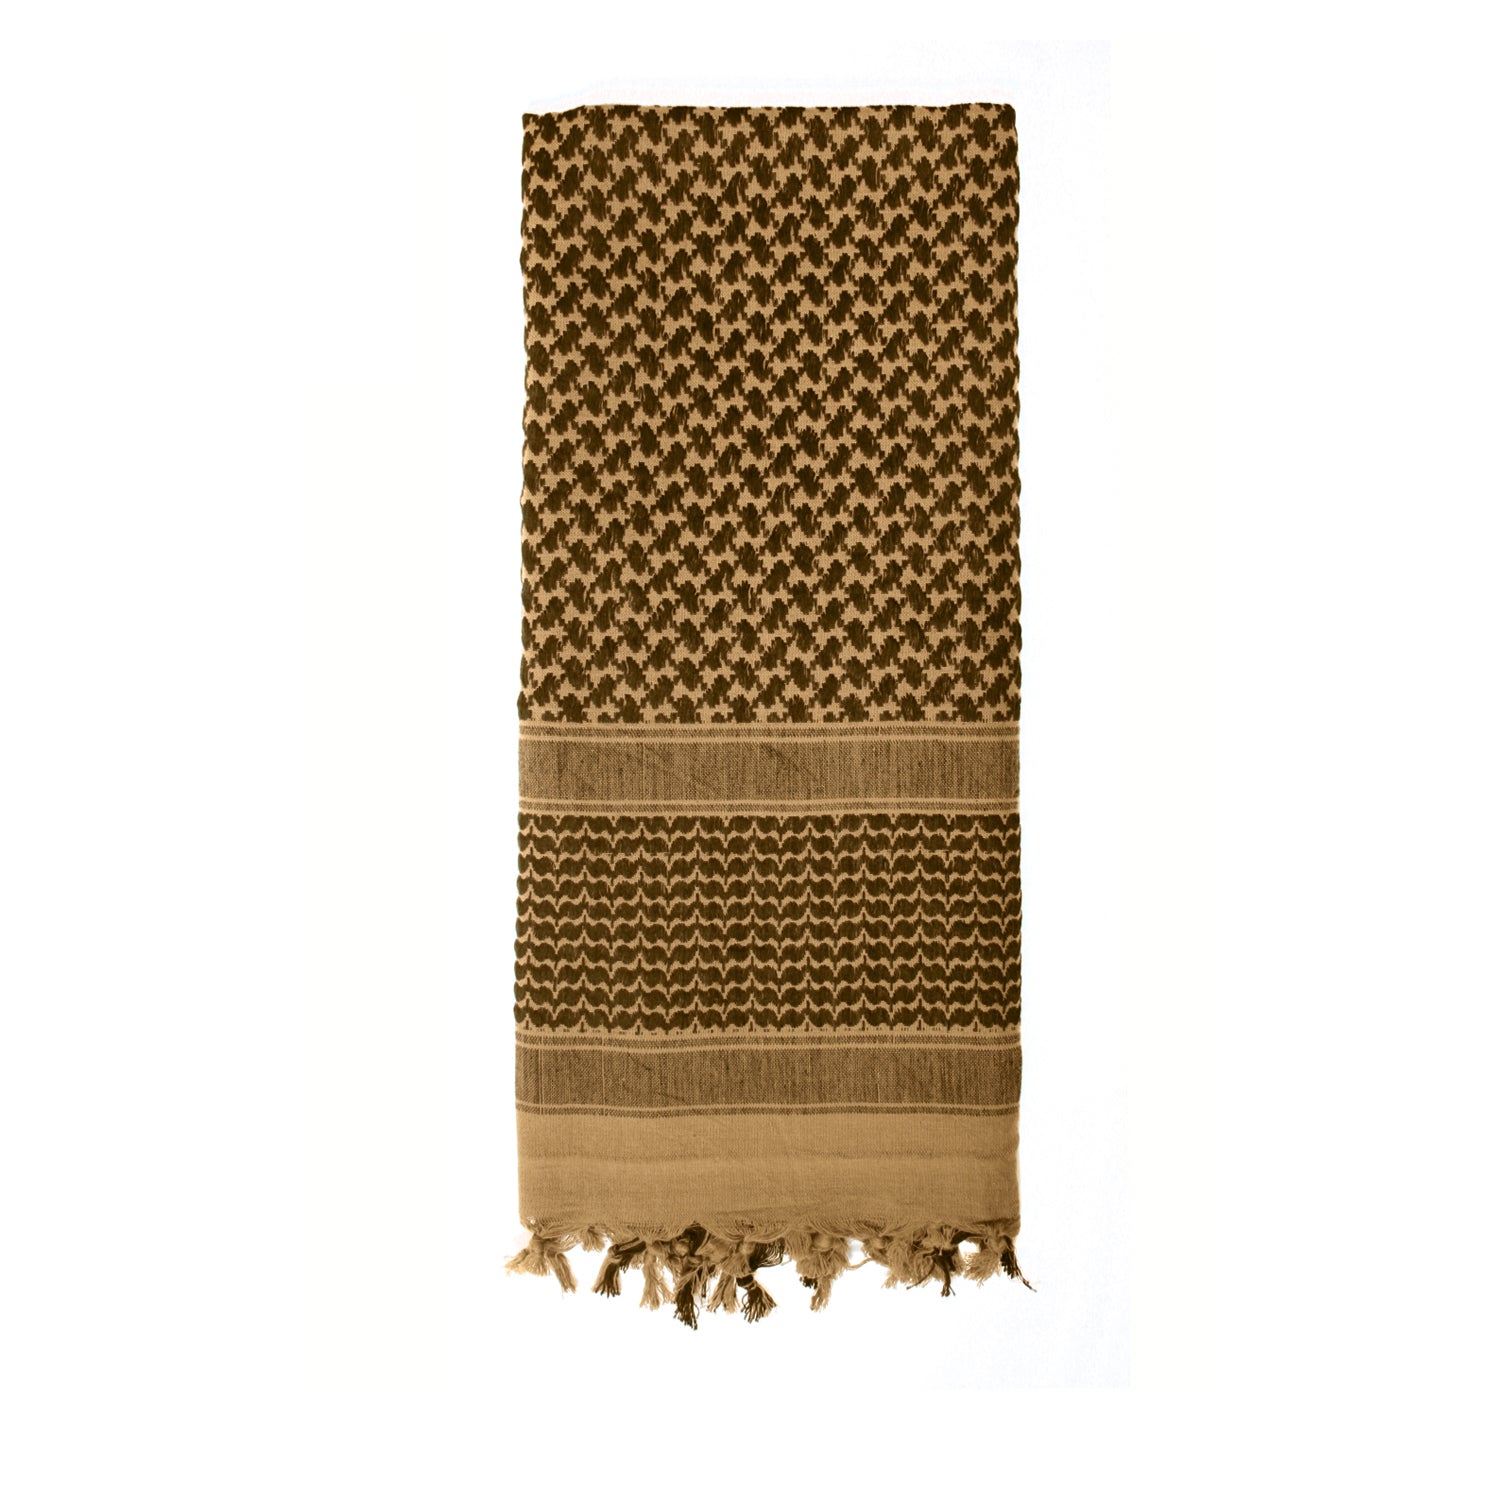 Large Shemagh Tactical Desert Scarf - 42 inches by 42 inches